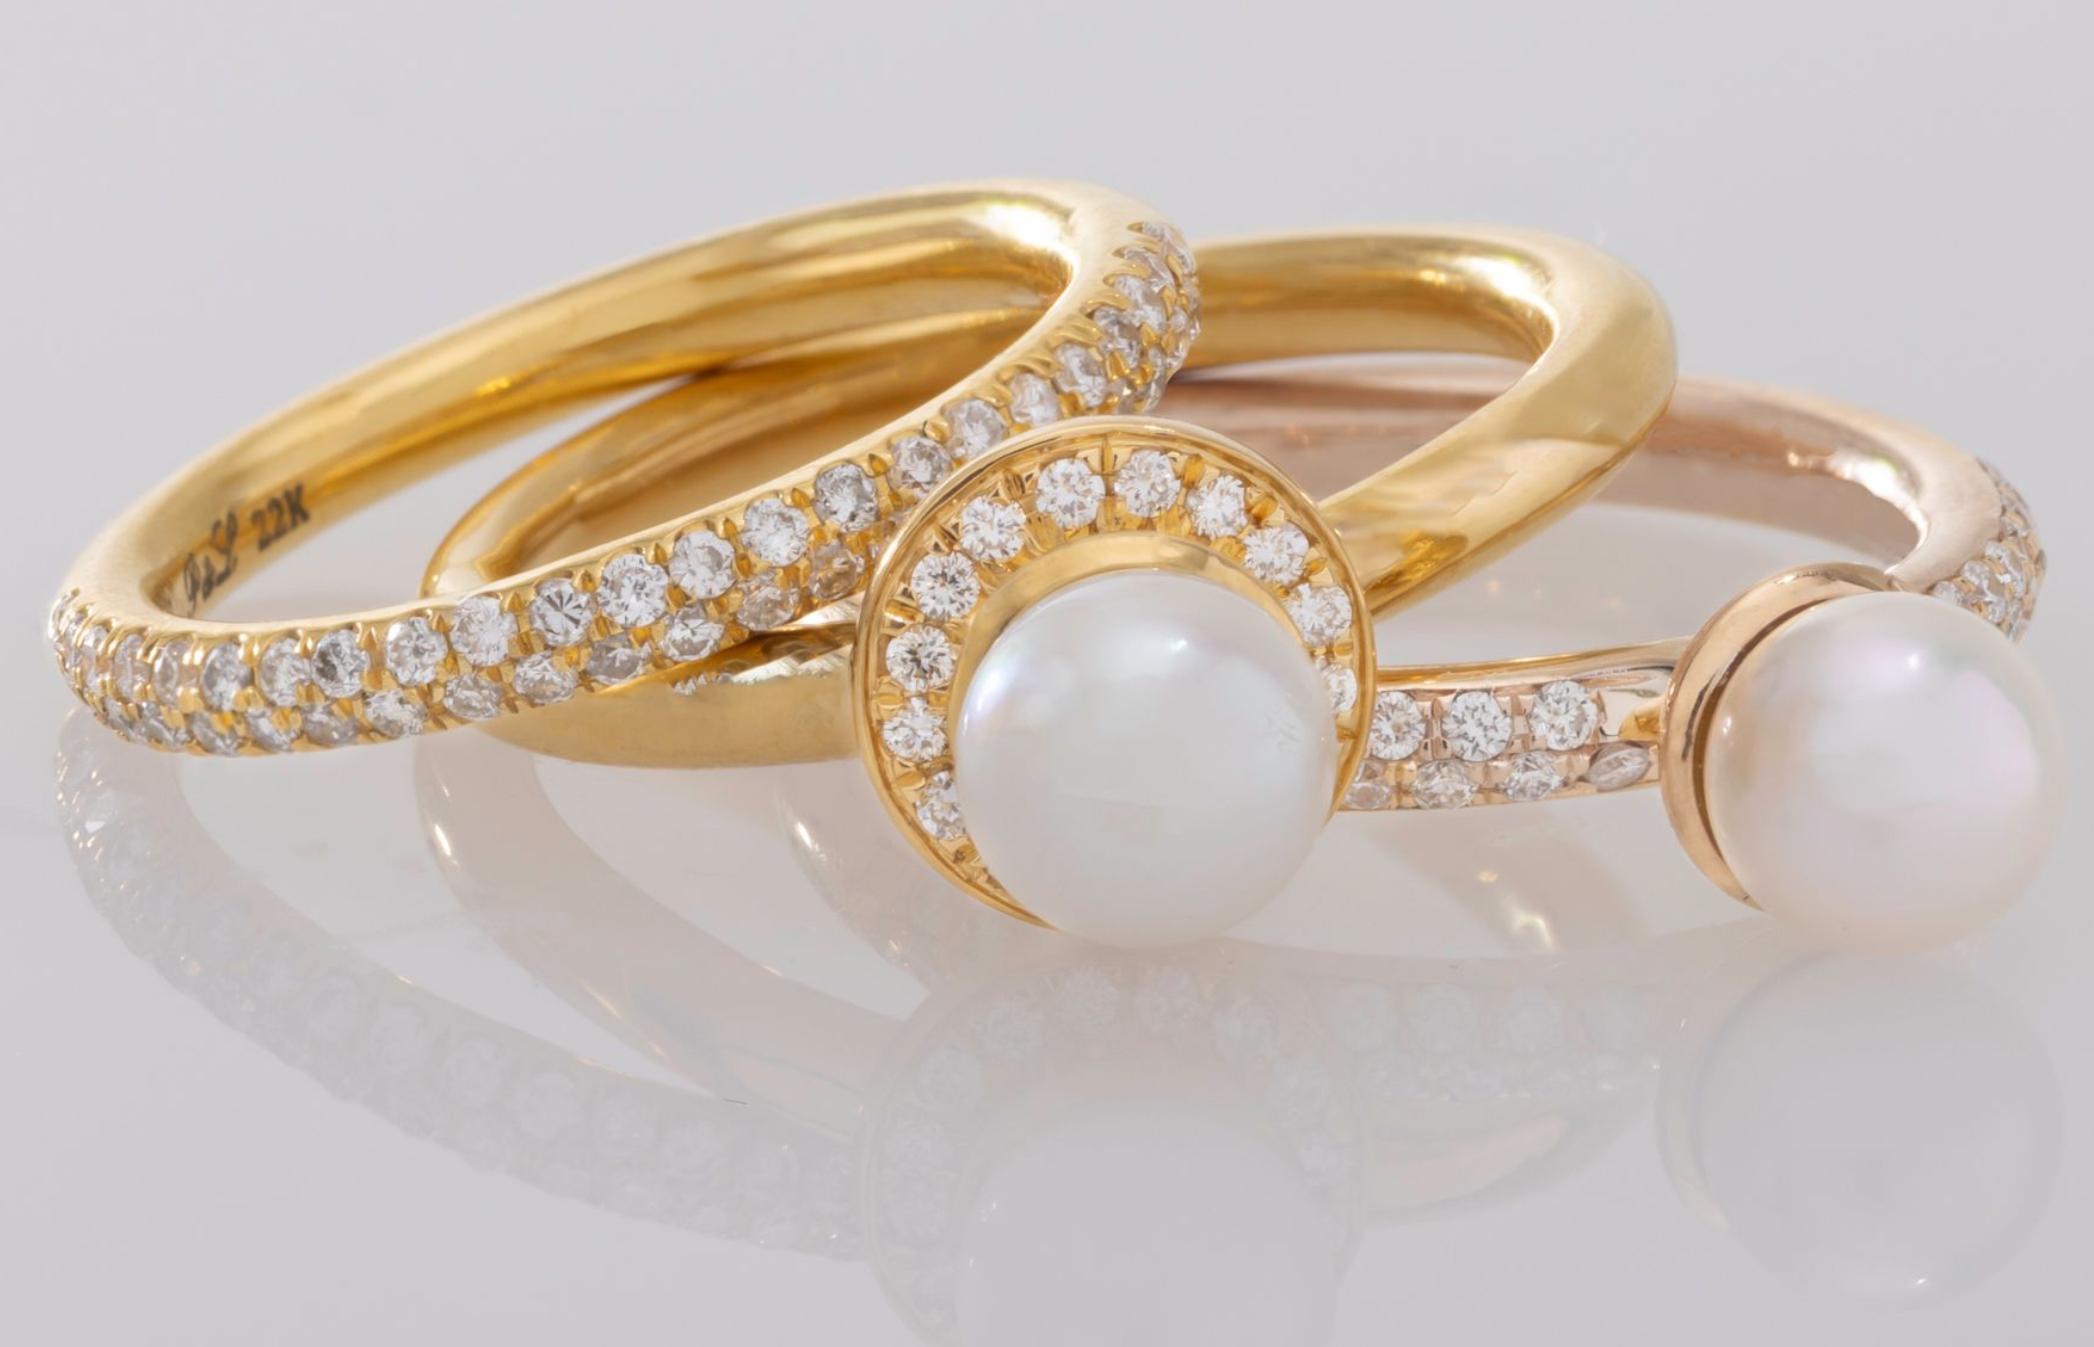 Paris & Lily handmade, 22K gold, diamond halo and pearl ring.  Brilliant cut diamonds surround this white, Akoya pearl with a sparkling halo.  The pearl measures approximatley 5mm round and has incredible luster.  Paris & Lily rings are beautiful